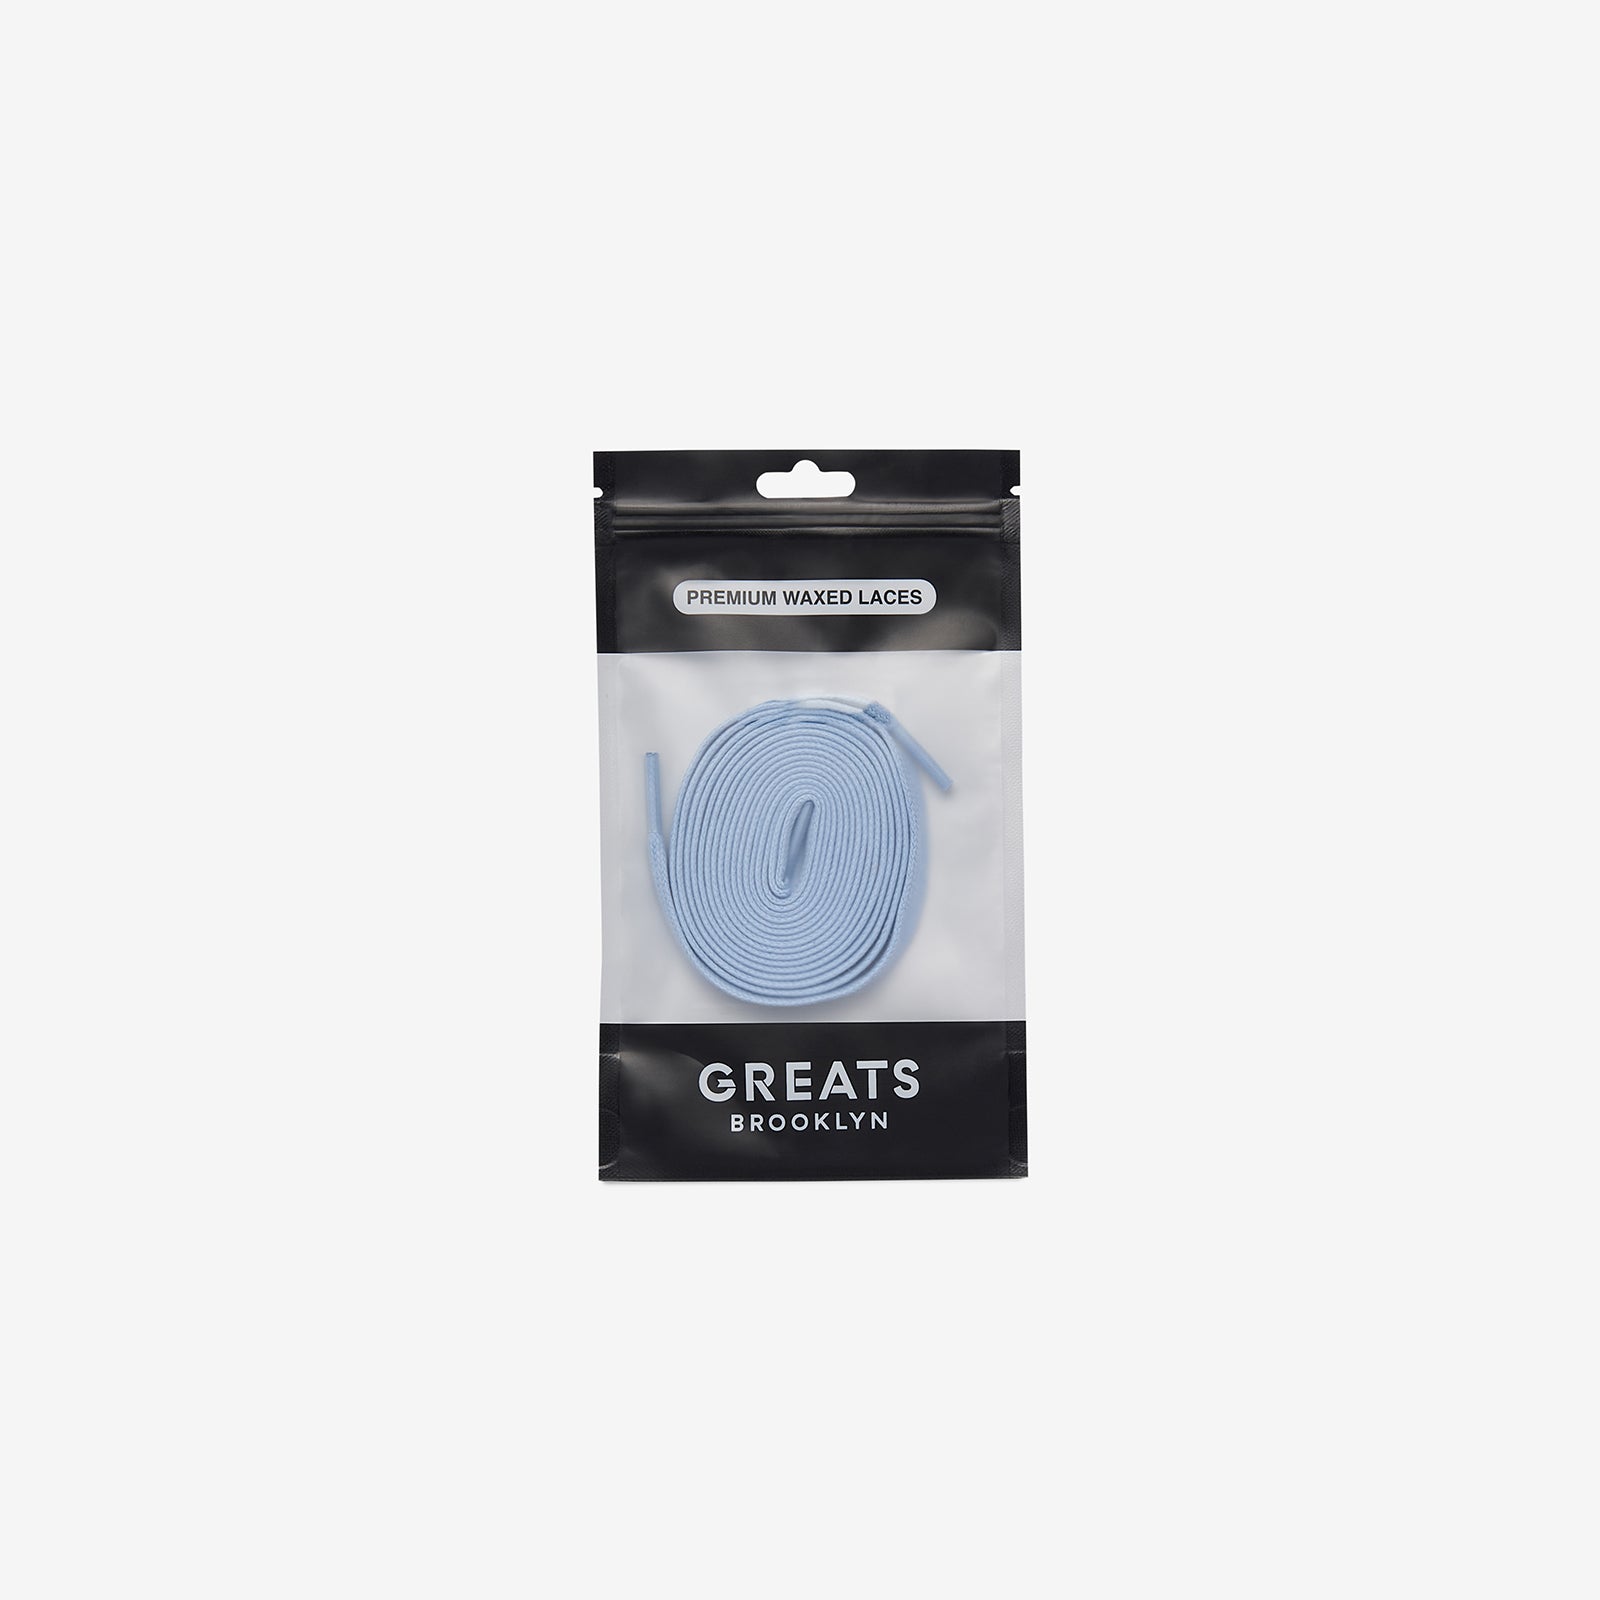 GREATS Premium Waxed Laces - Light Blue